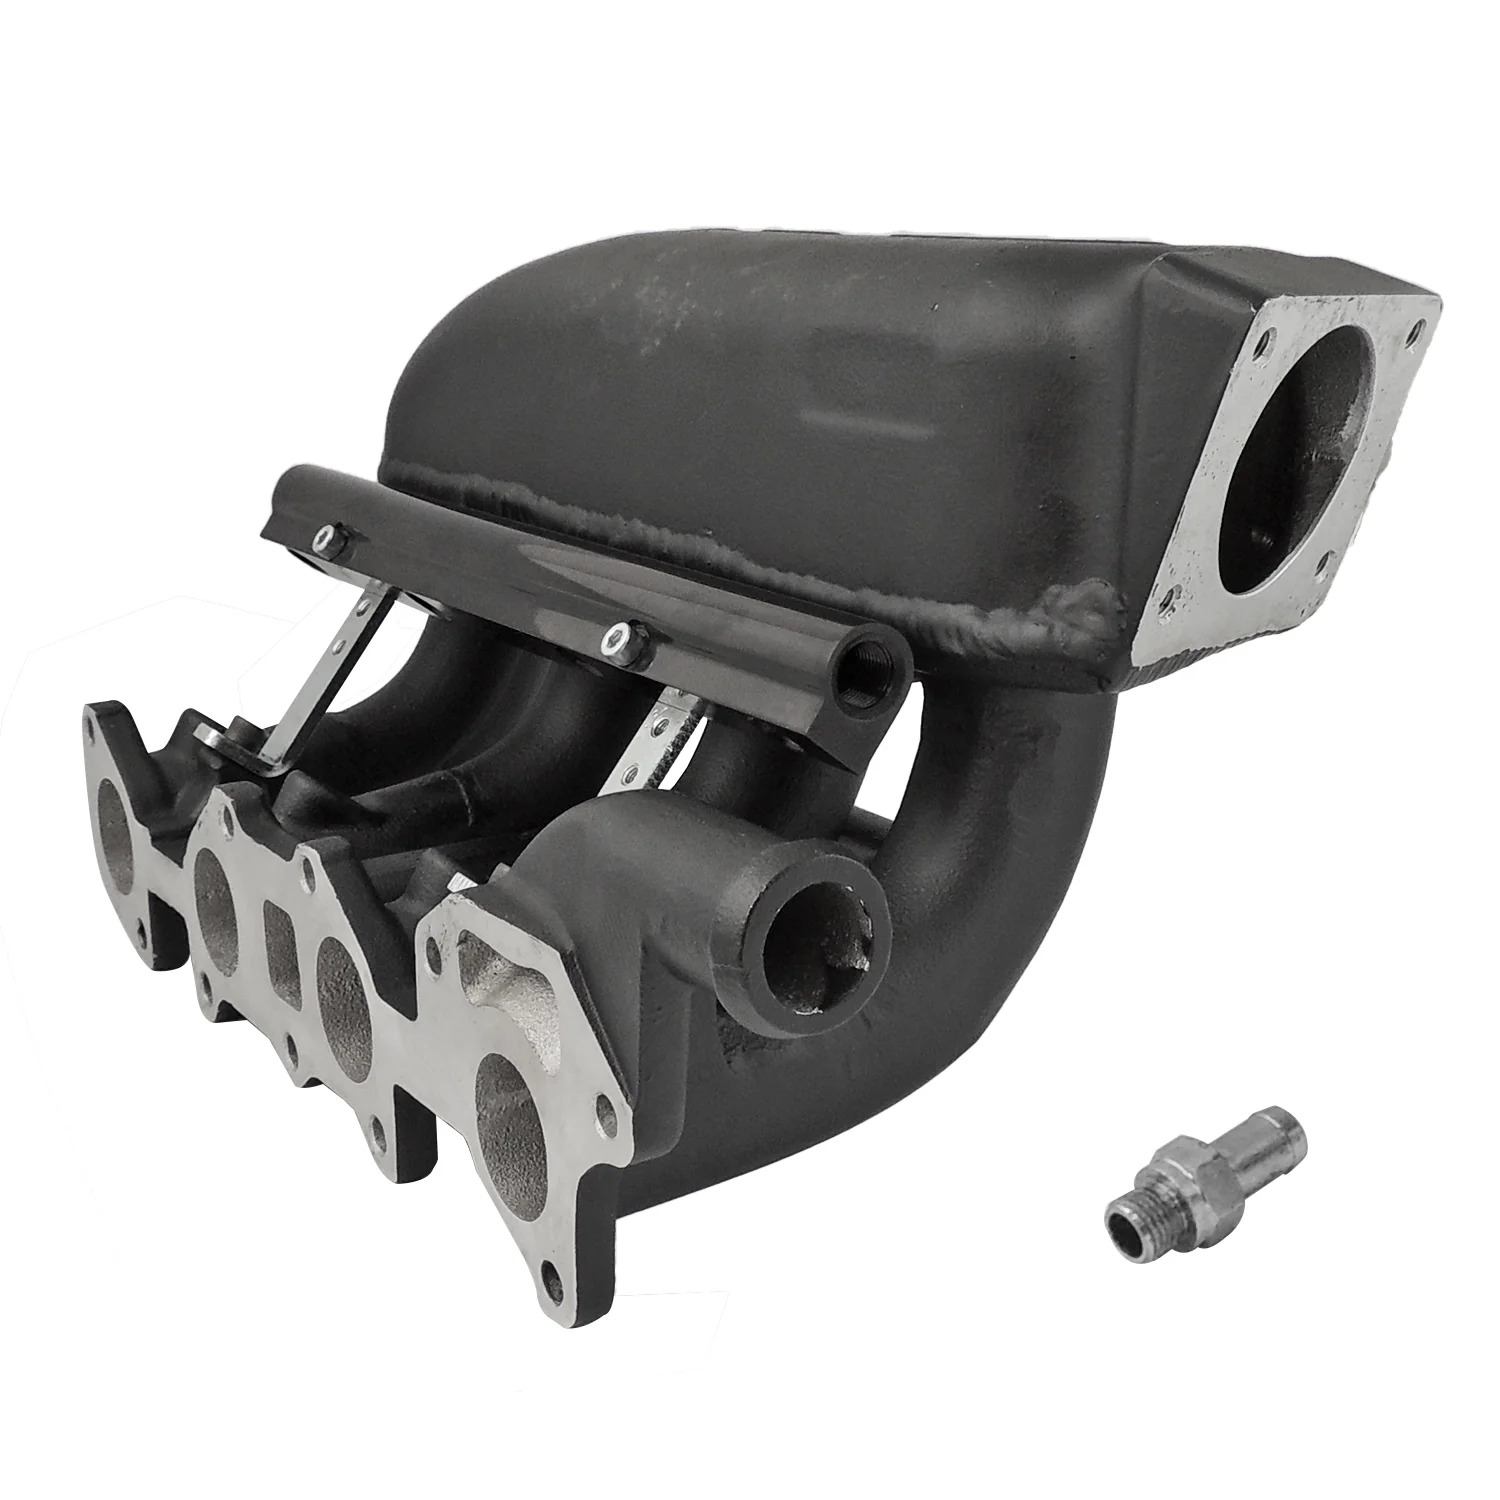 INTAKE MANIFOLD CHEVY CHEVETTE / PONTIAC T1000 / ACADIAN 1.4 / 1.6L TOWARD FRONT